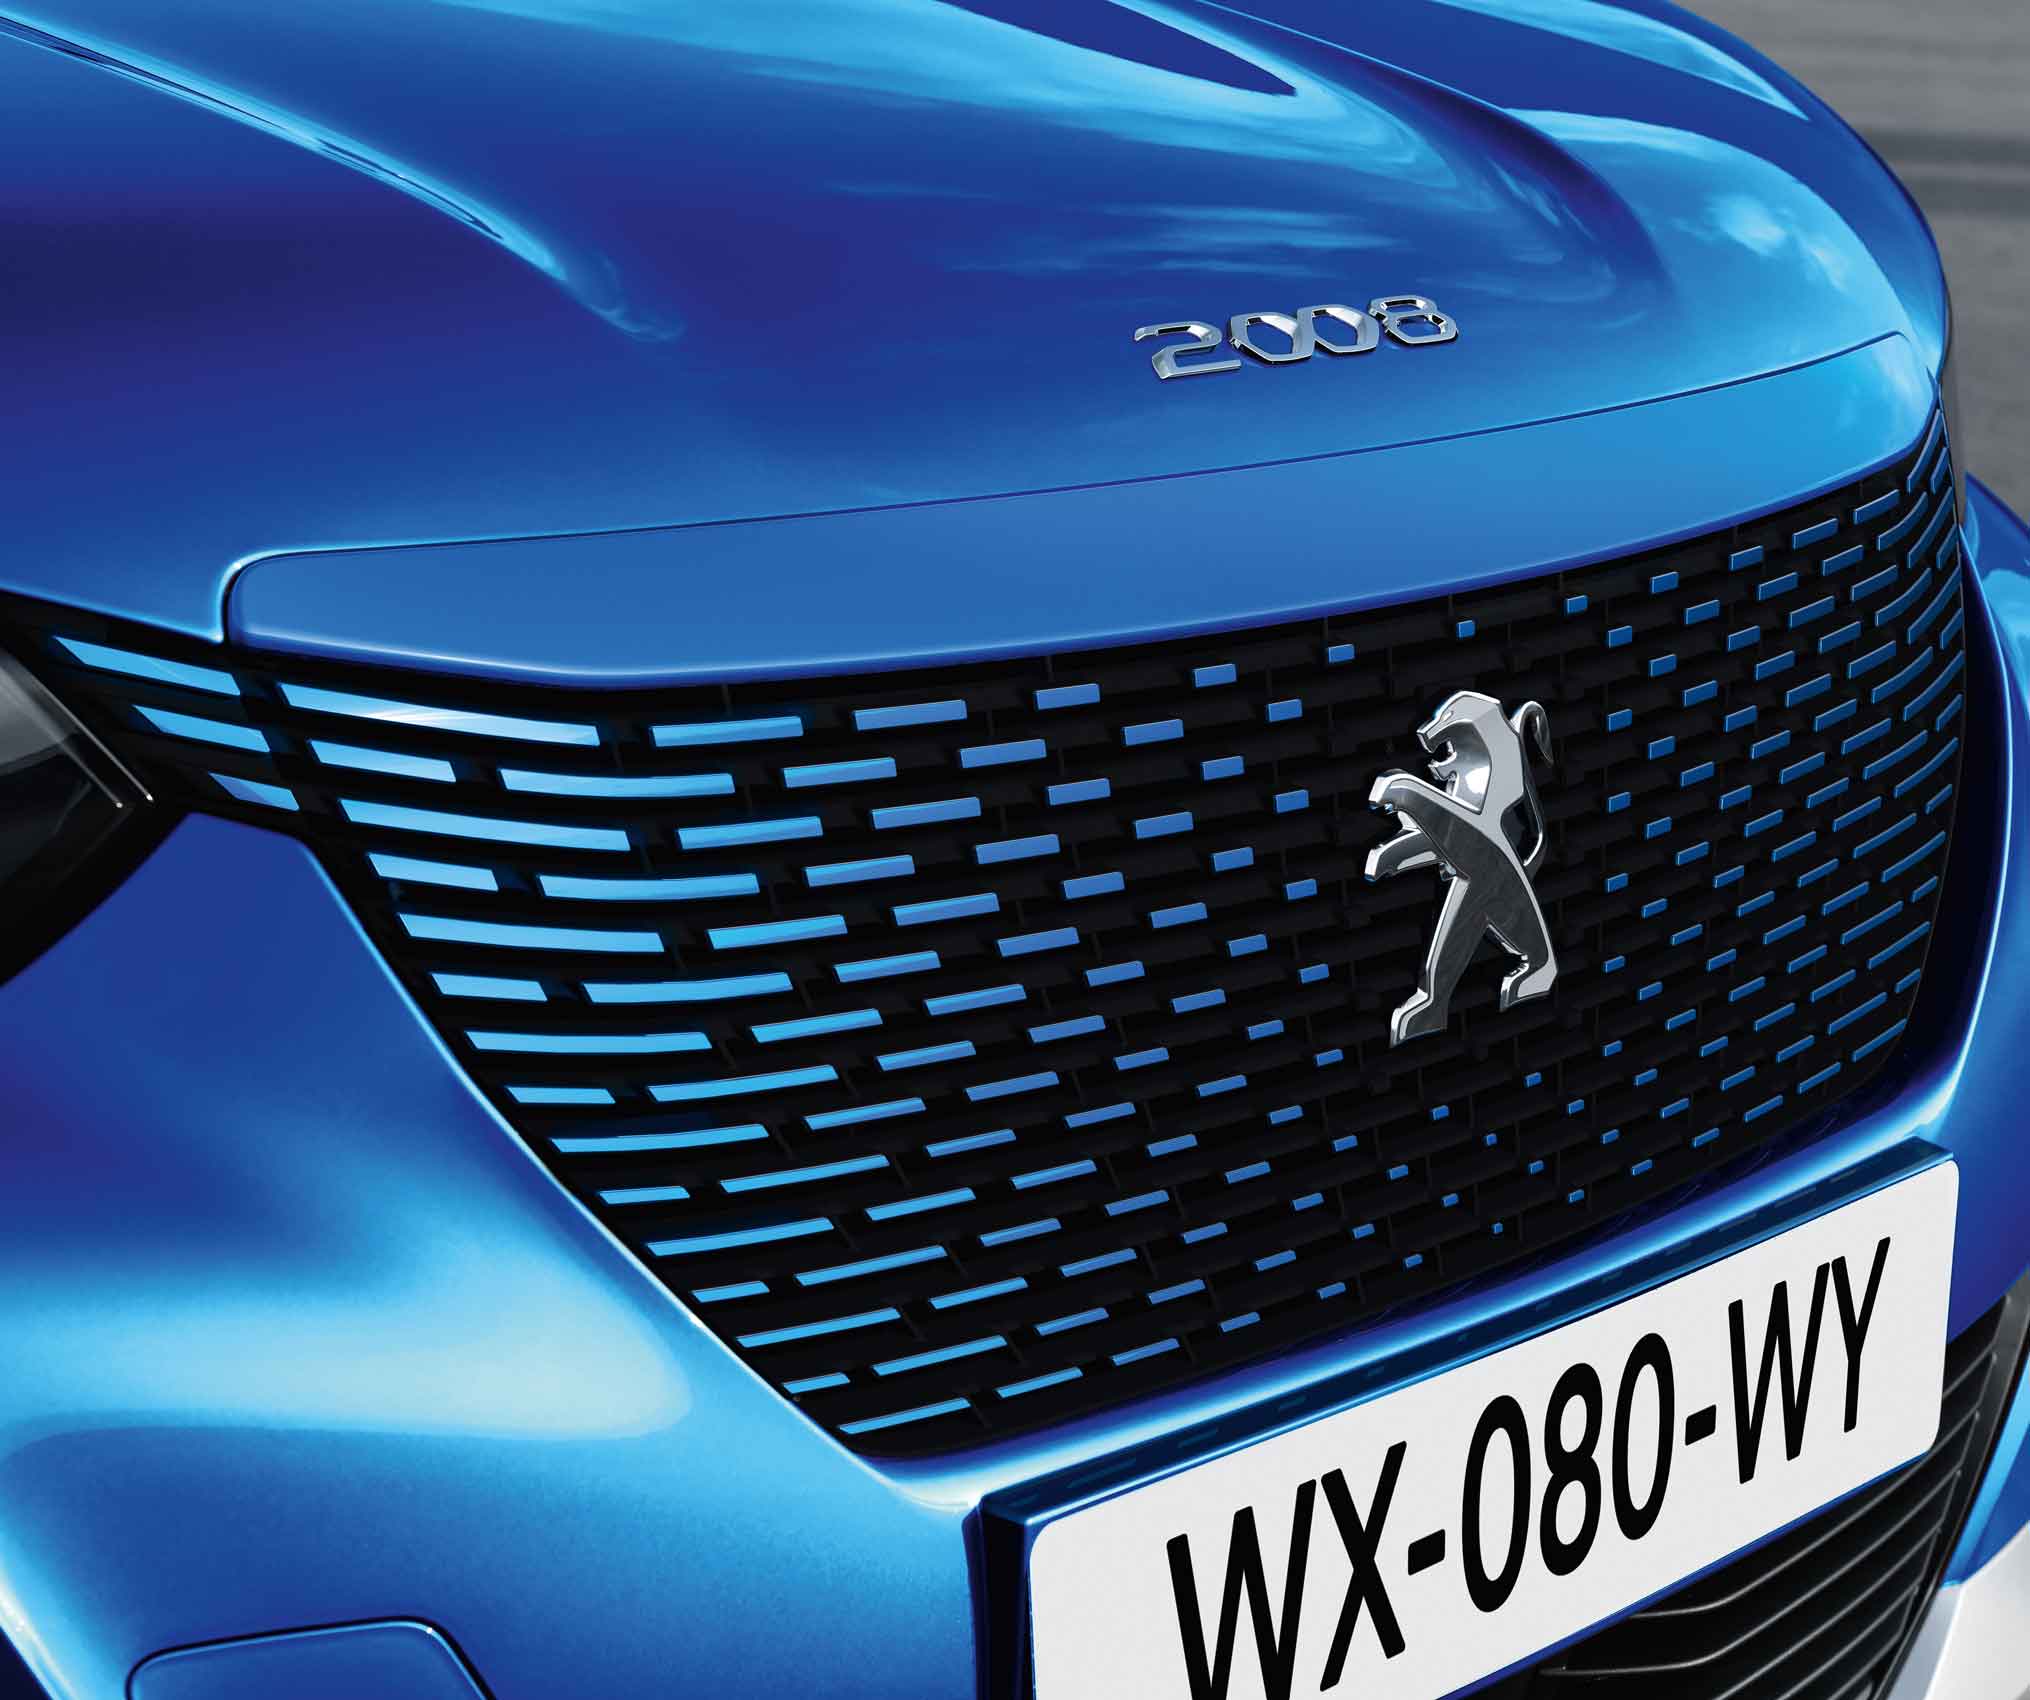 The front grill of the Peugeot e2008